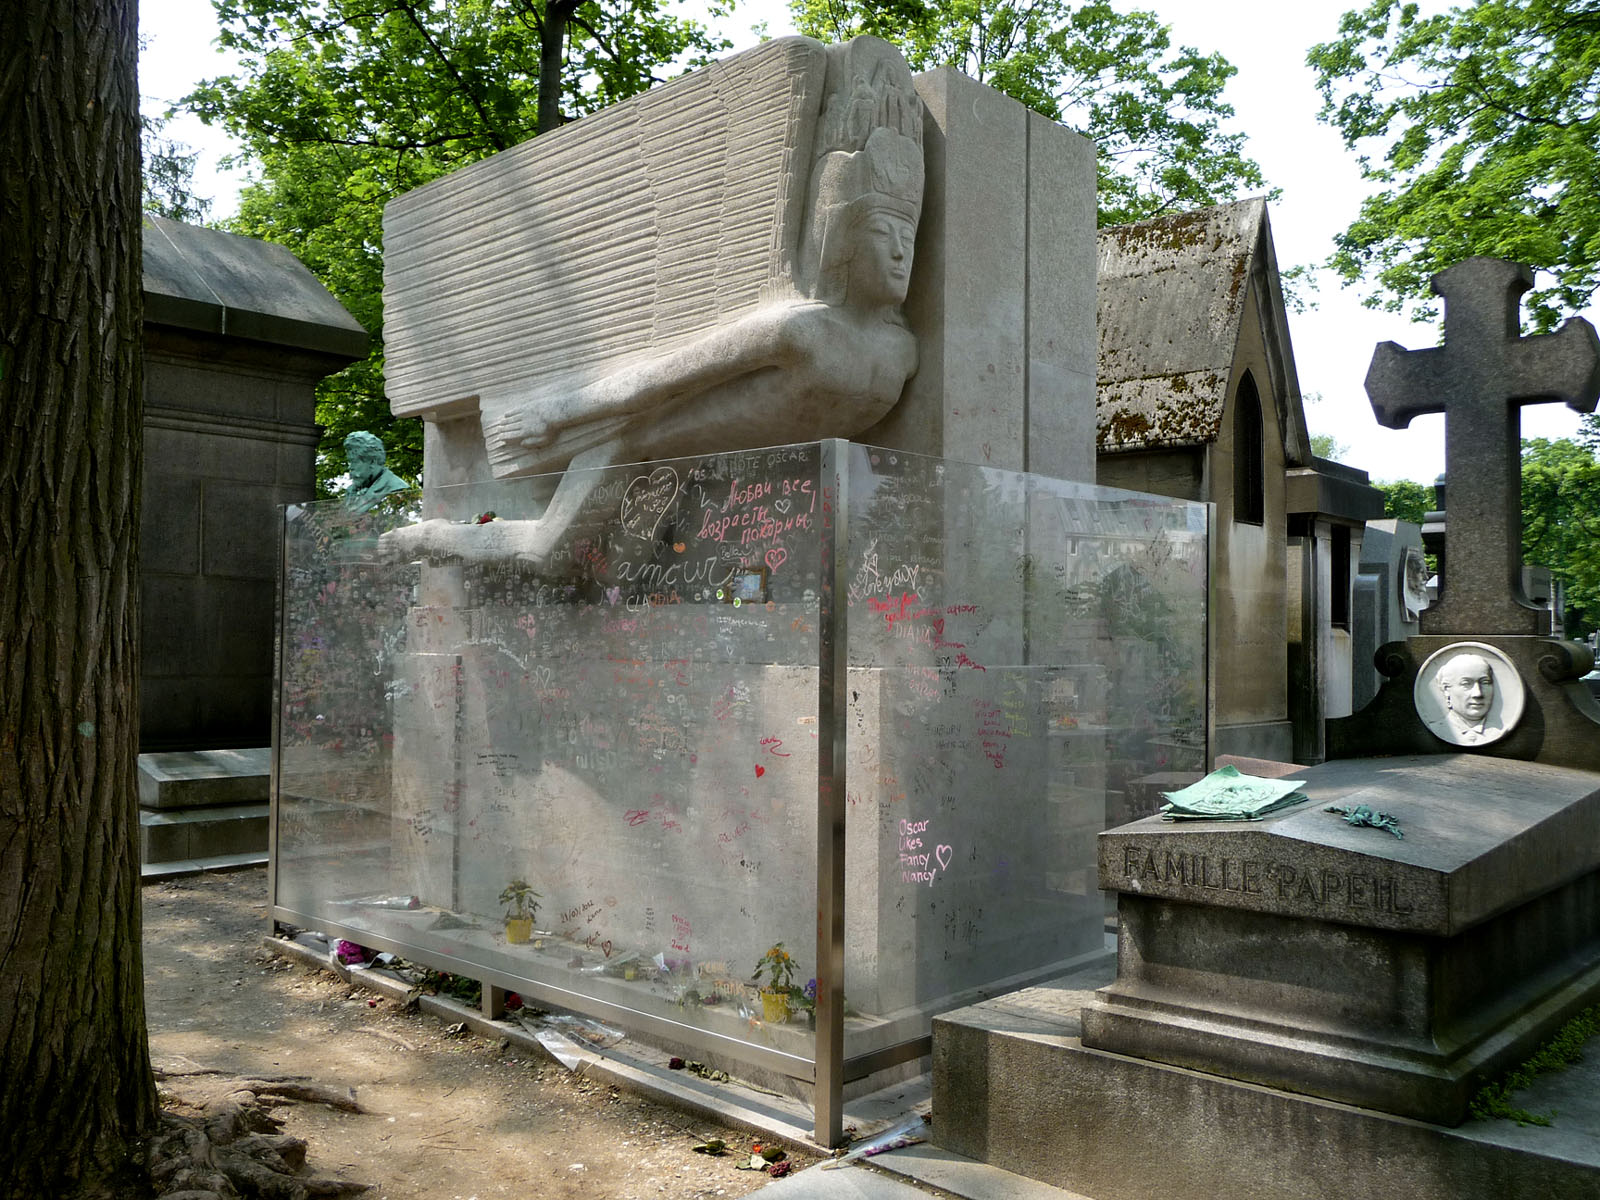 insolite - Le topic insolite - Page 14 Tomb_of_Oscar_Wilde_Pere_Lachaise_cemetery_Paris_France